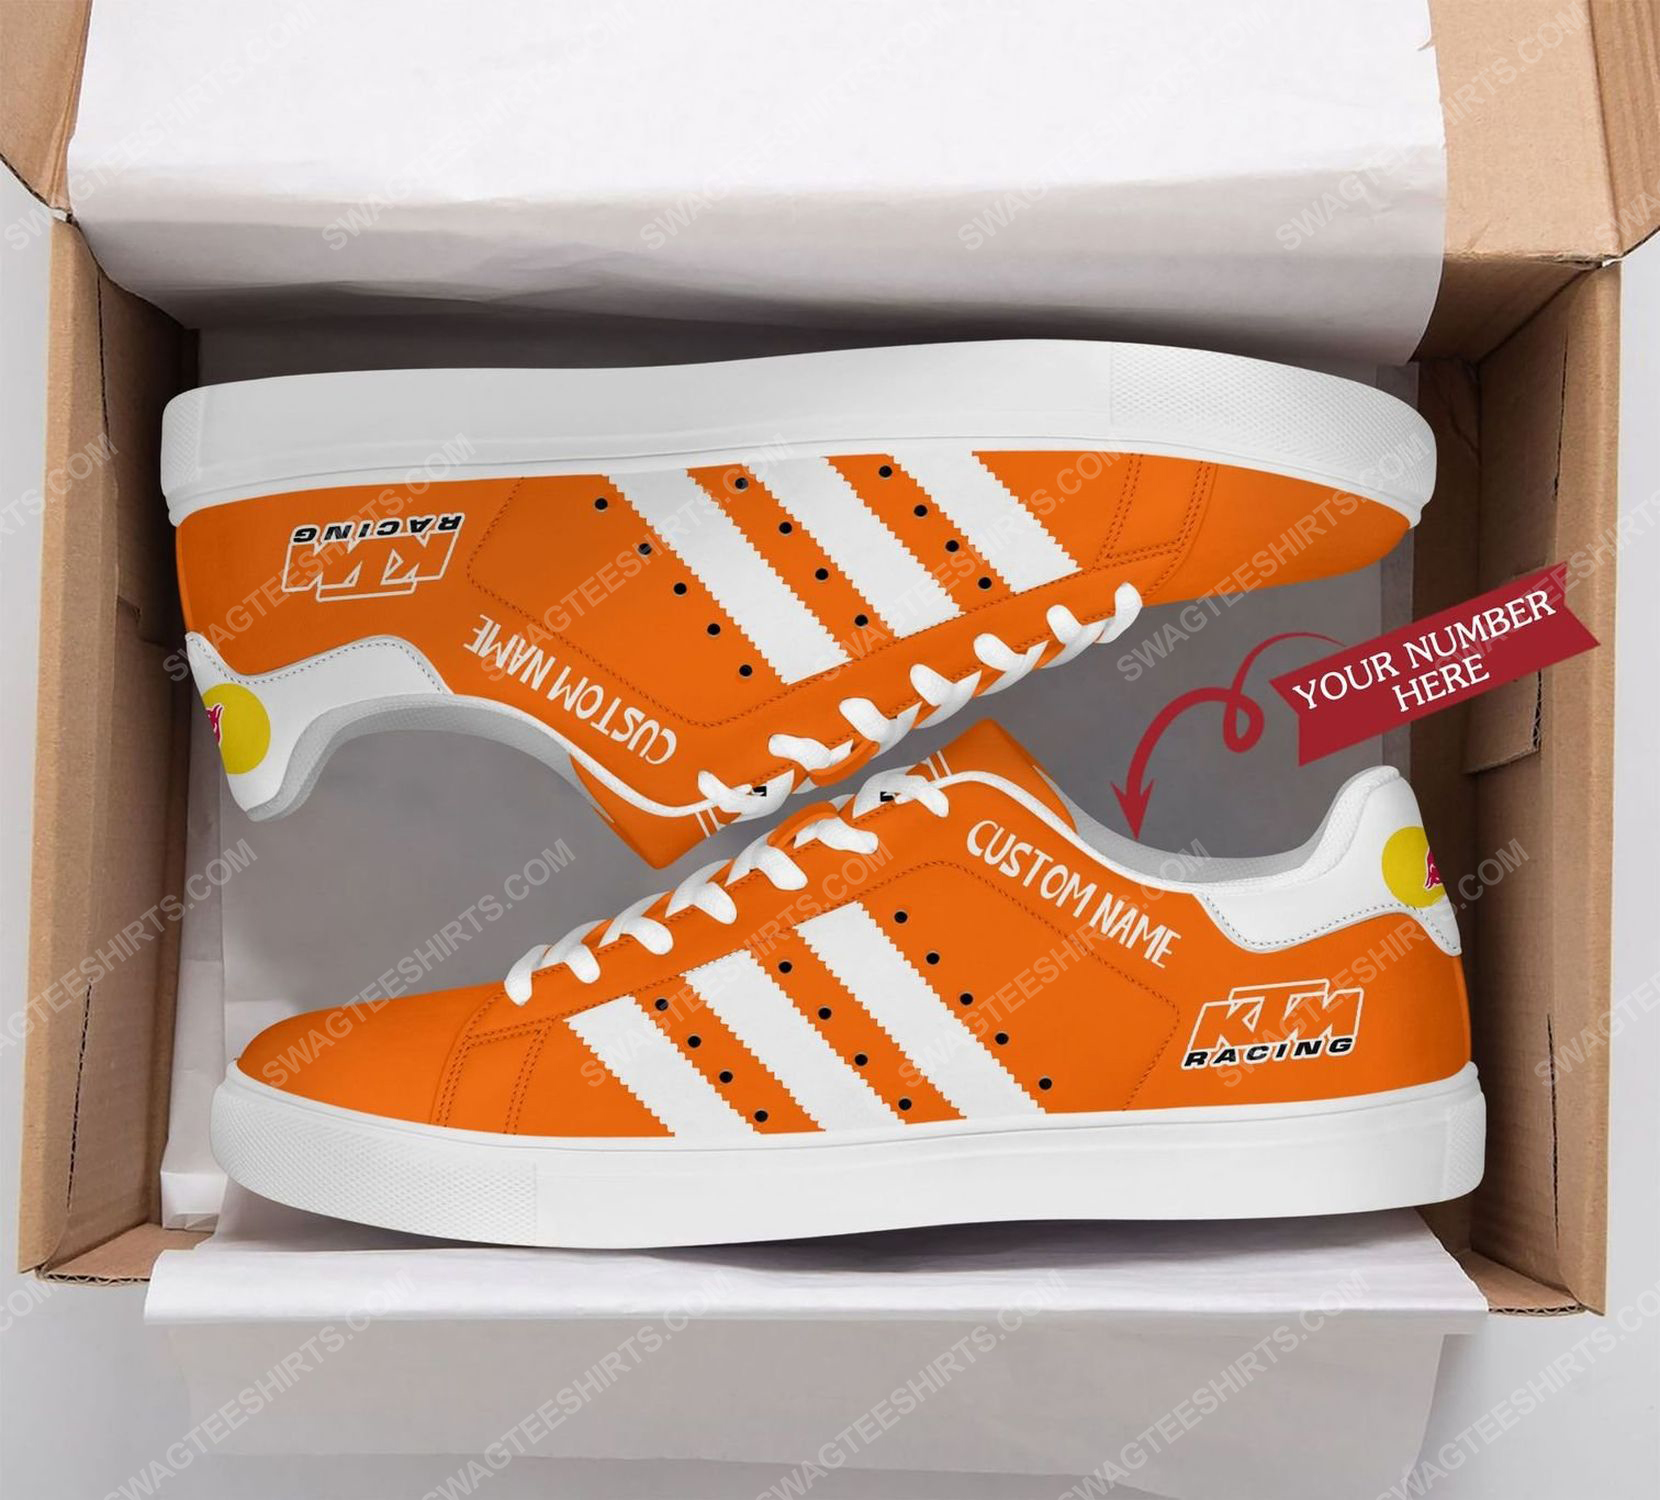 [special edition] Custom red bull ktm factory racing stan smith shoes – Maria